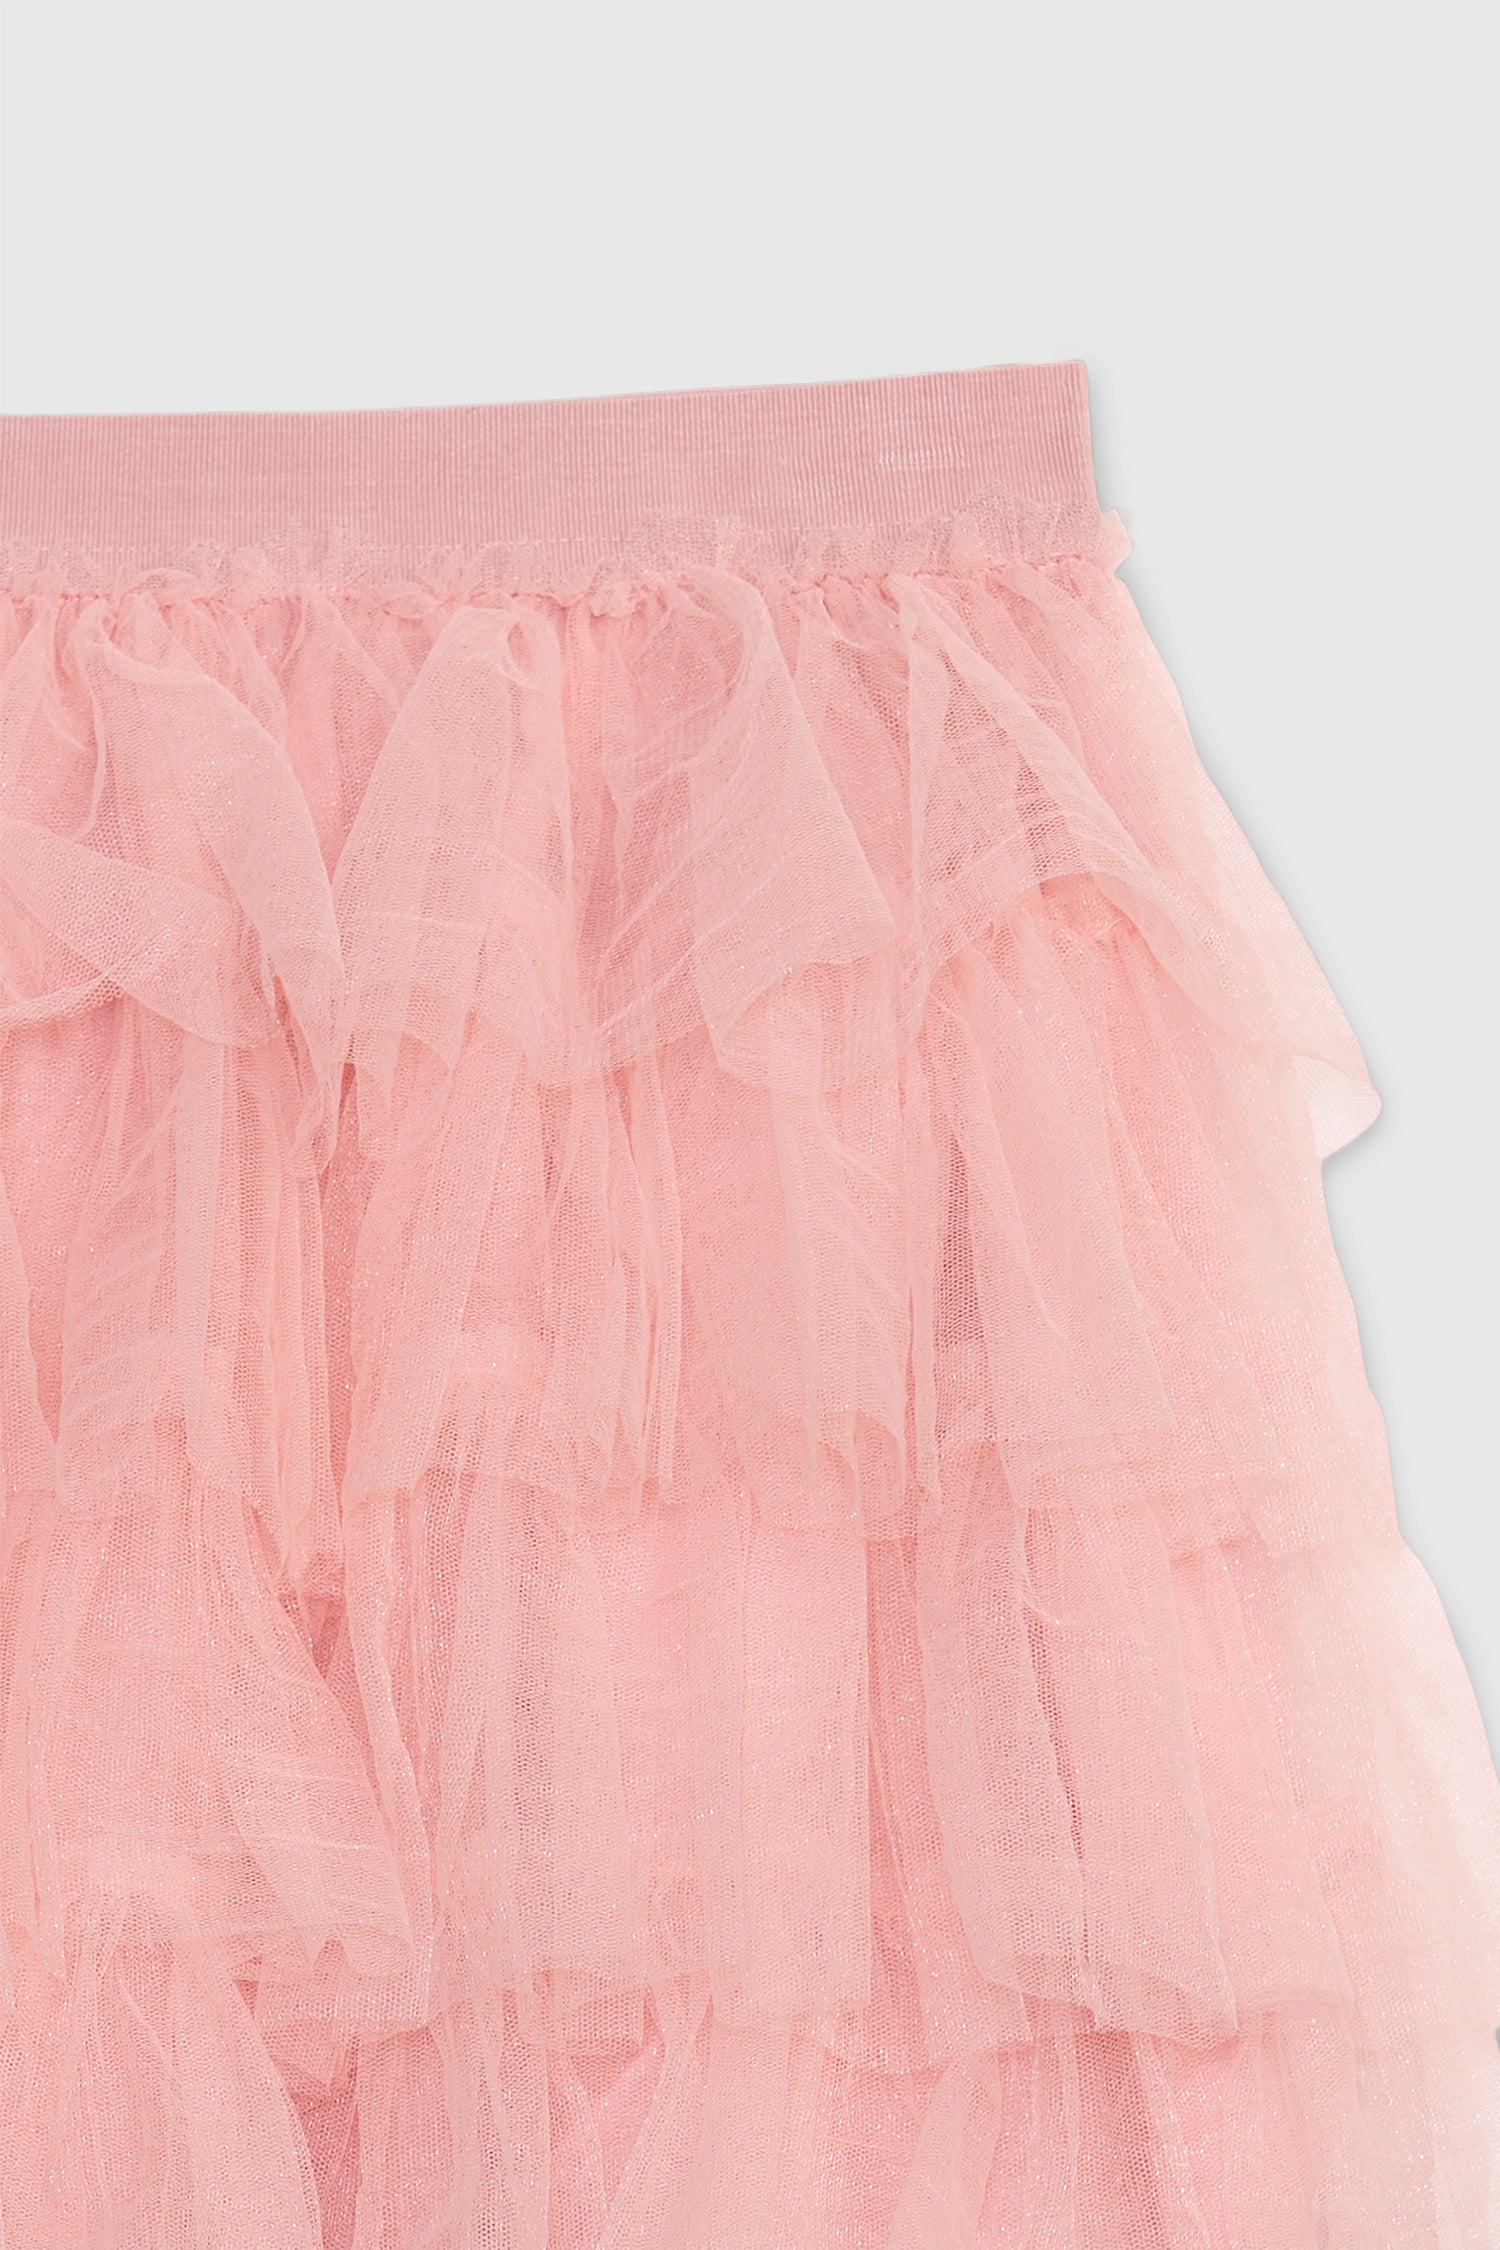 Close up image showing waistband and tulle on kids pink tulle tiered mini skirt with elastic waistband